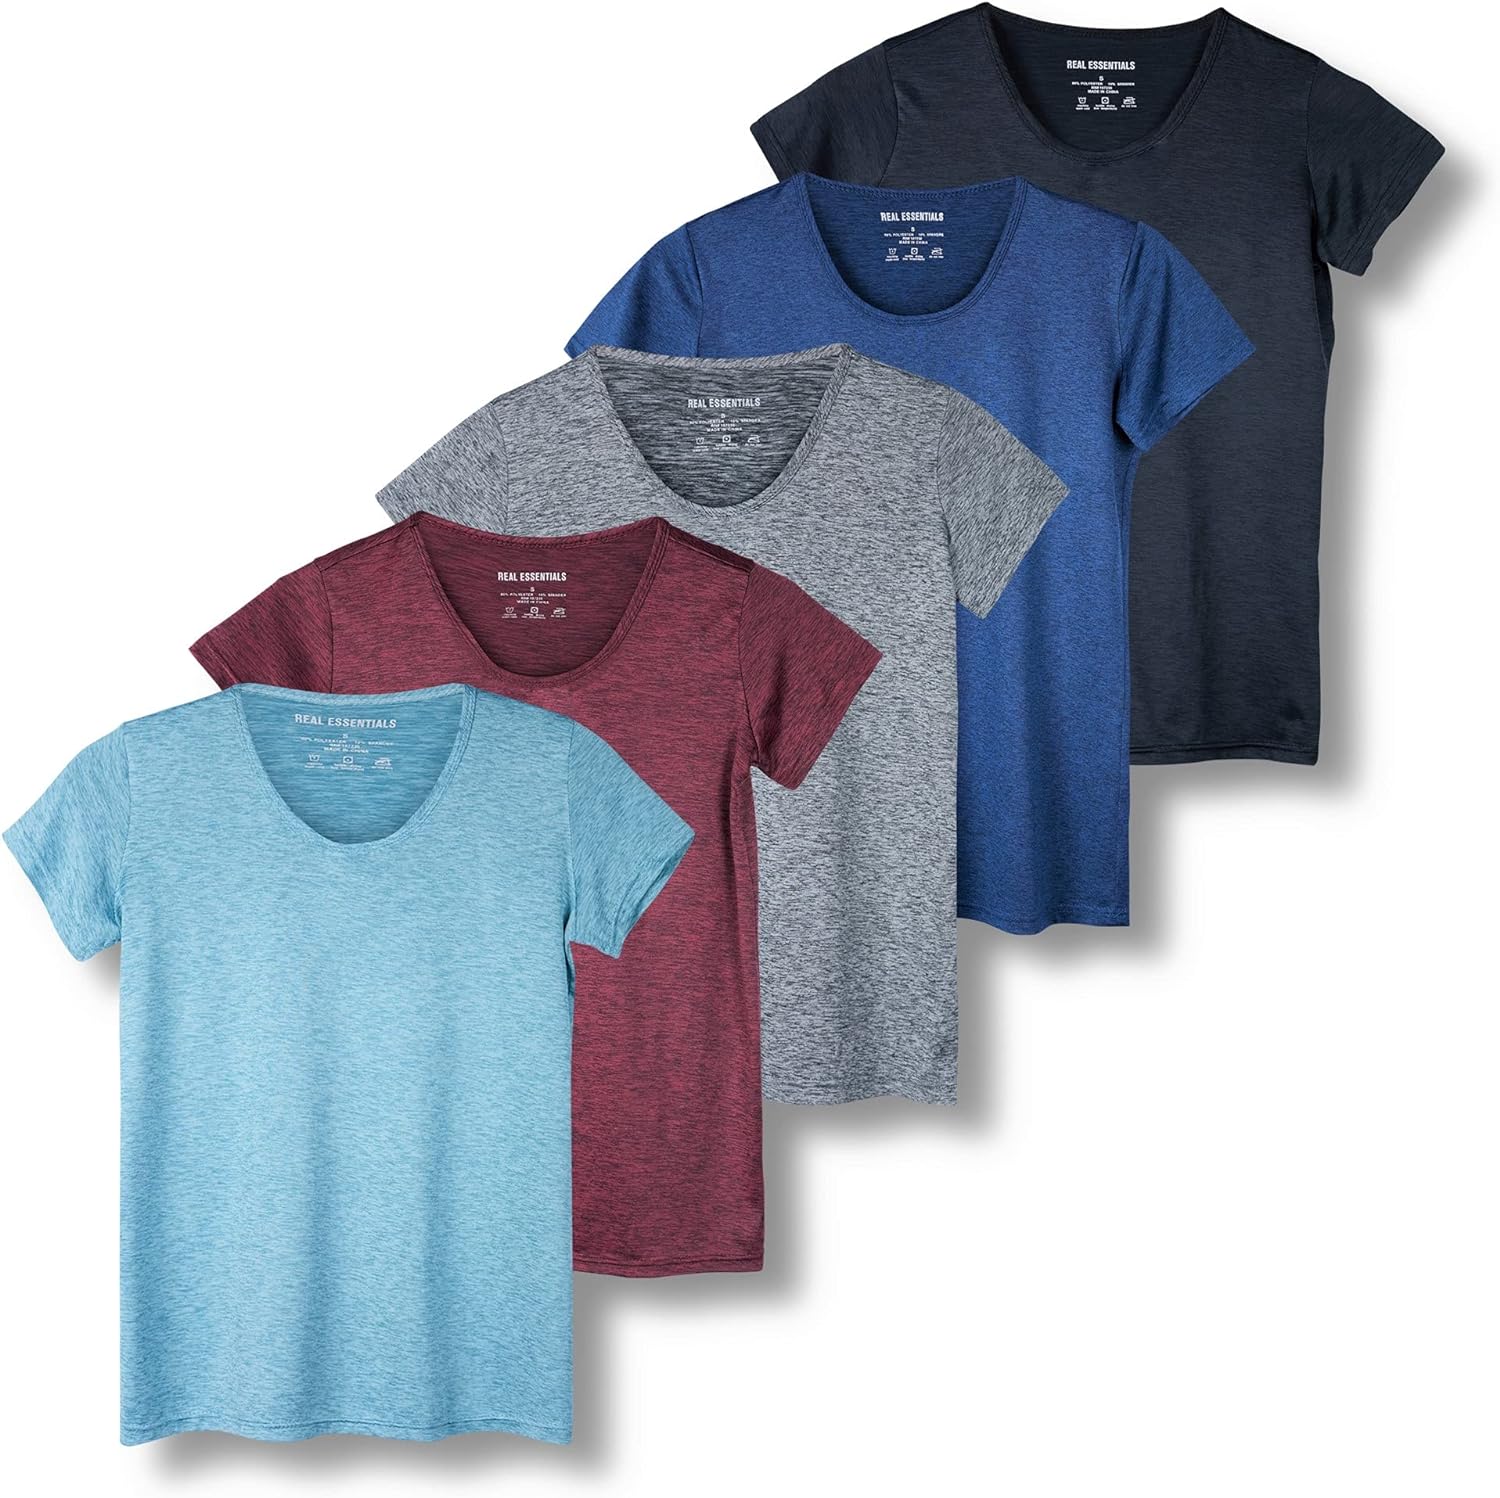 Real Essentials 5 Pack: Women's Dry Fit Tech Stretch Short-Sleeve Crew Neck Athletic T-Shirt Review